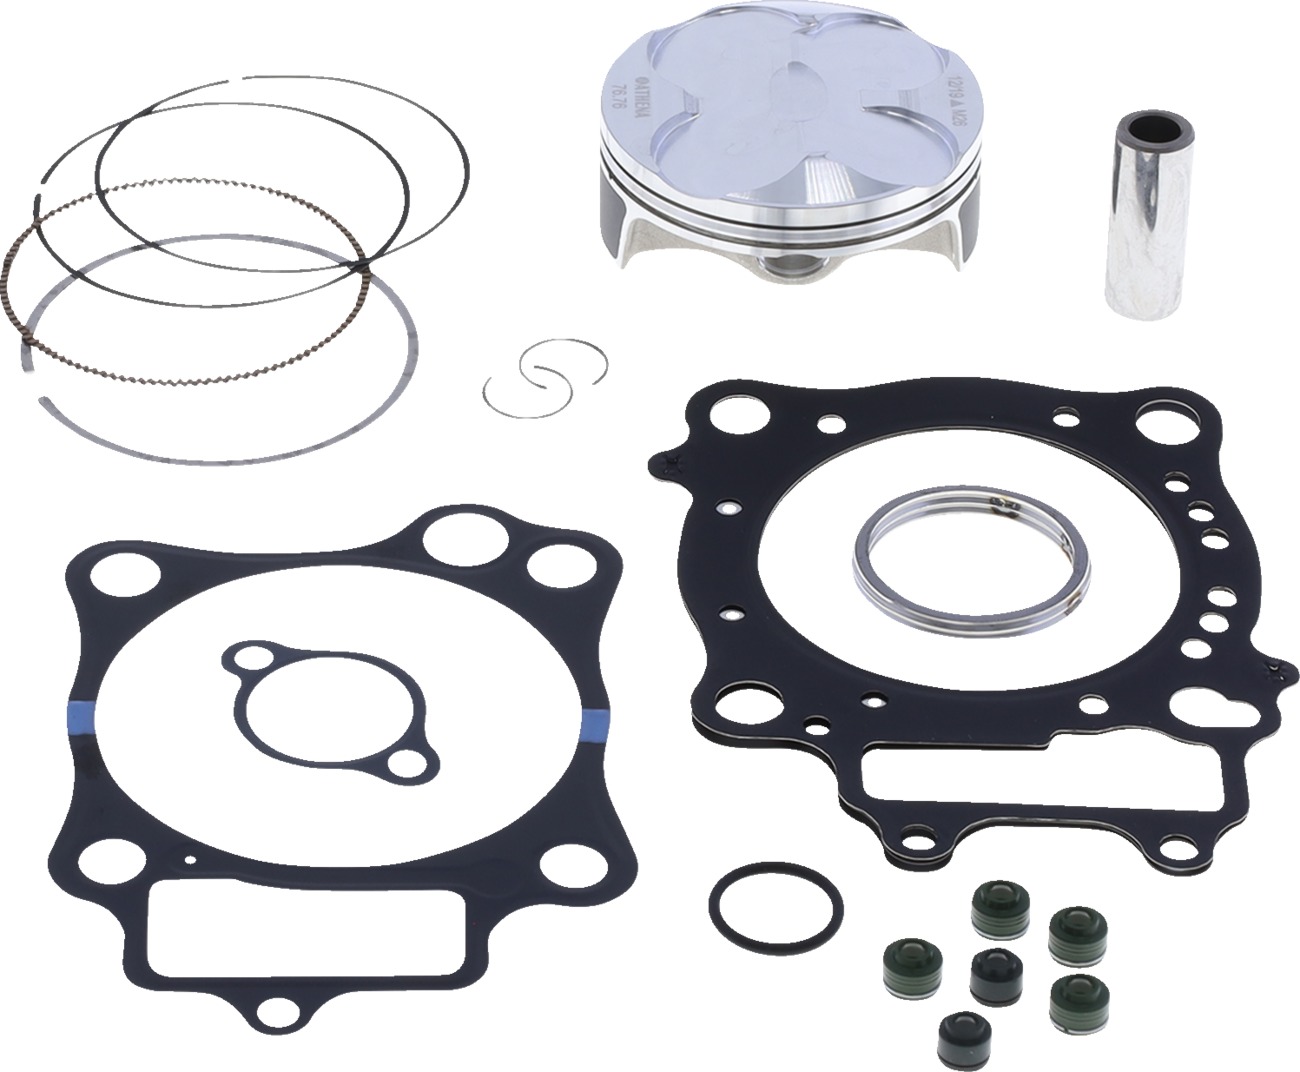 Piston & Top End Gasket Kit 'B' - For 14-15 Honda CRF250R - Click Image to Close